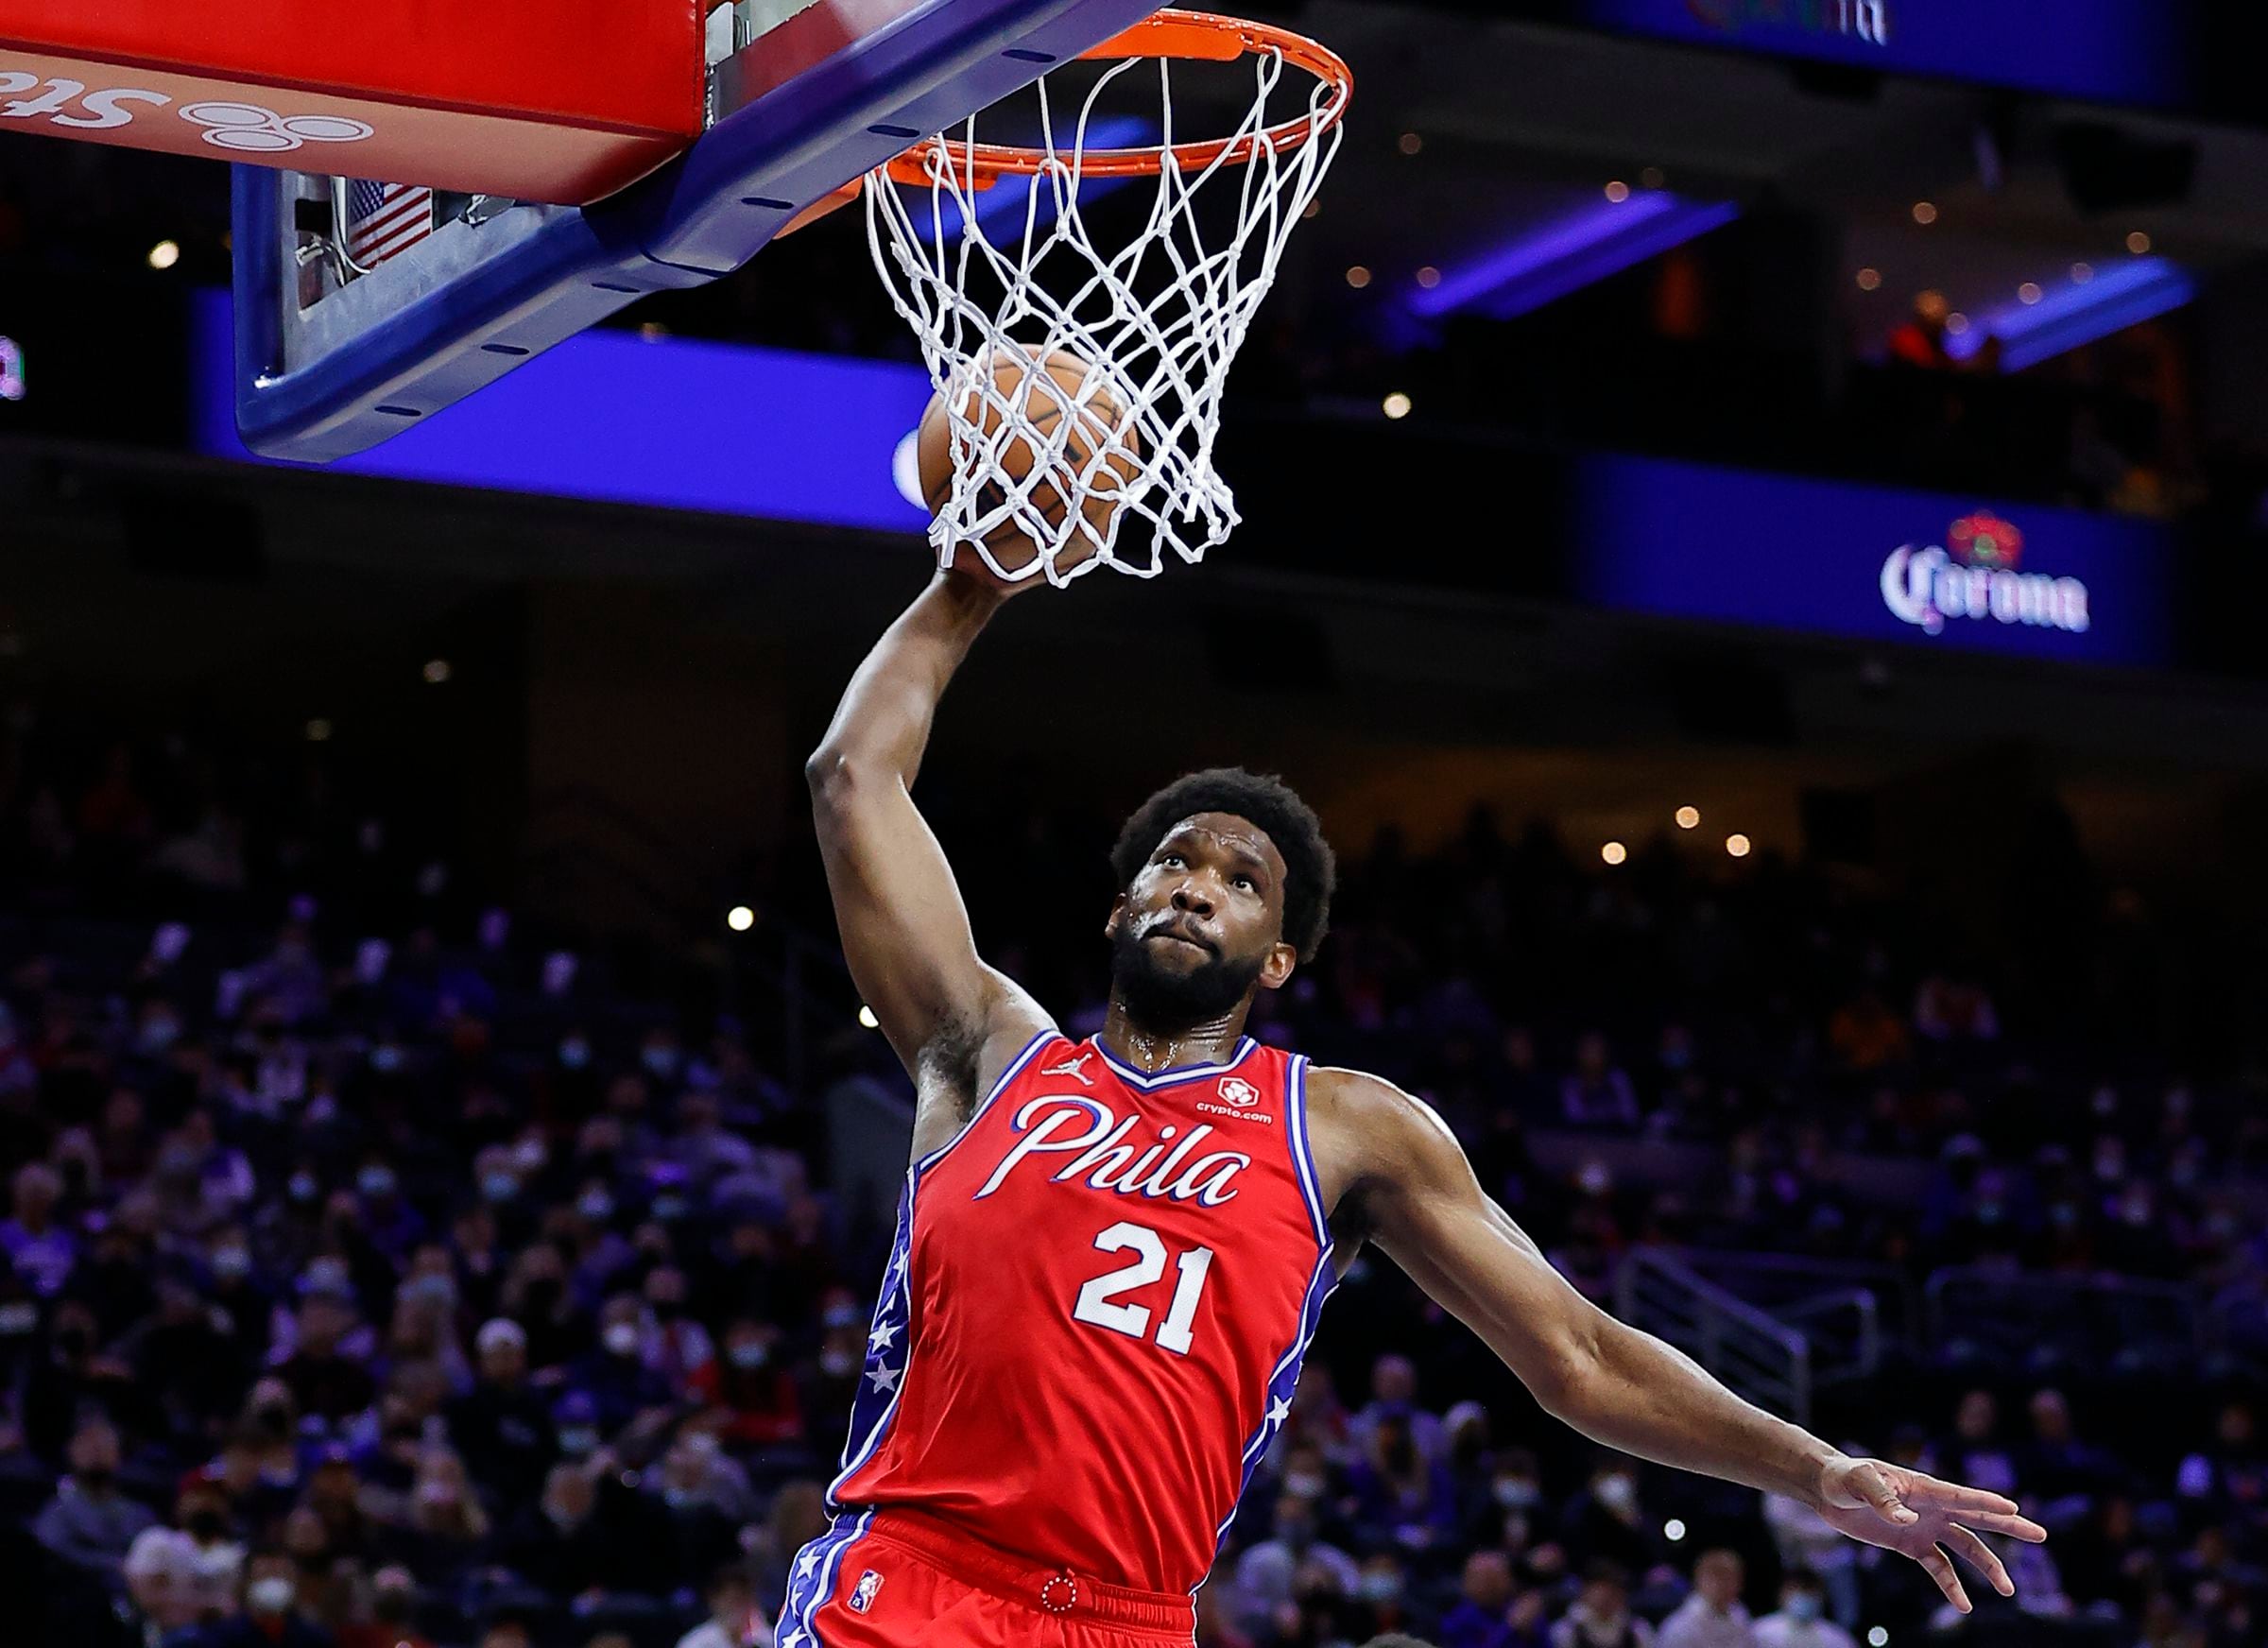 Joel Embiid shocks entire 76ers with nastiest poster dunk on